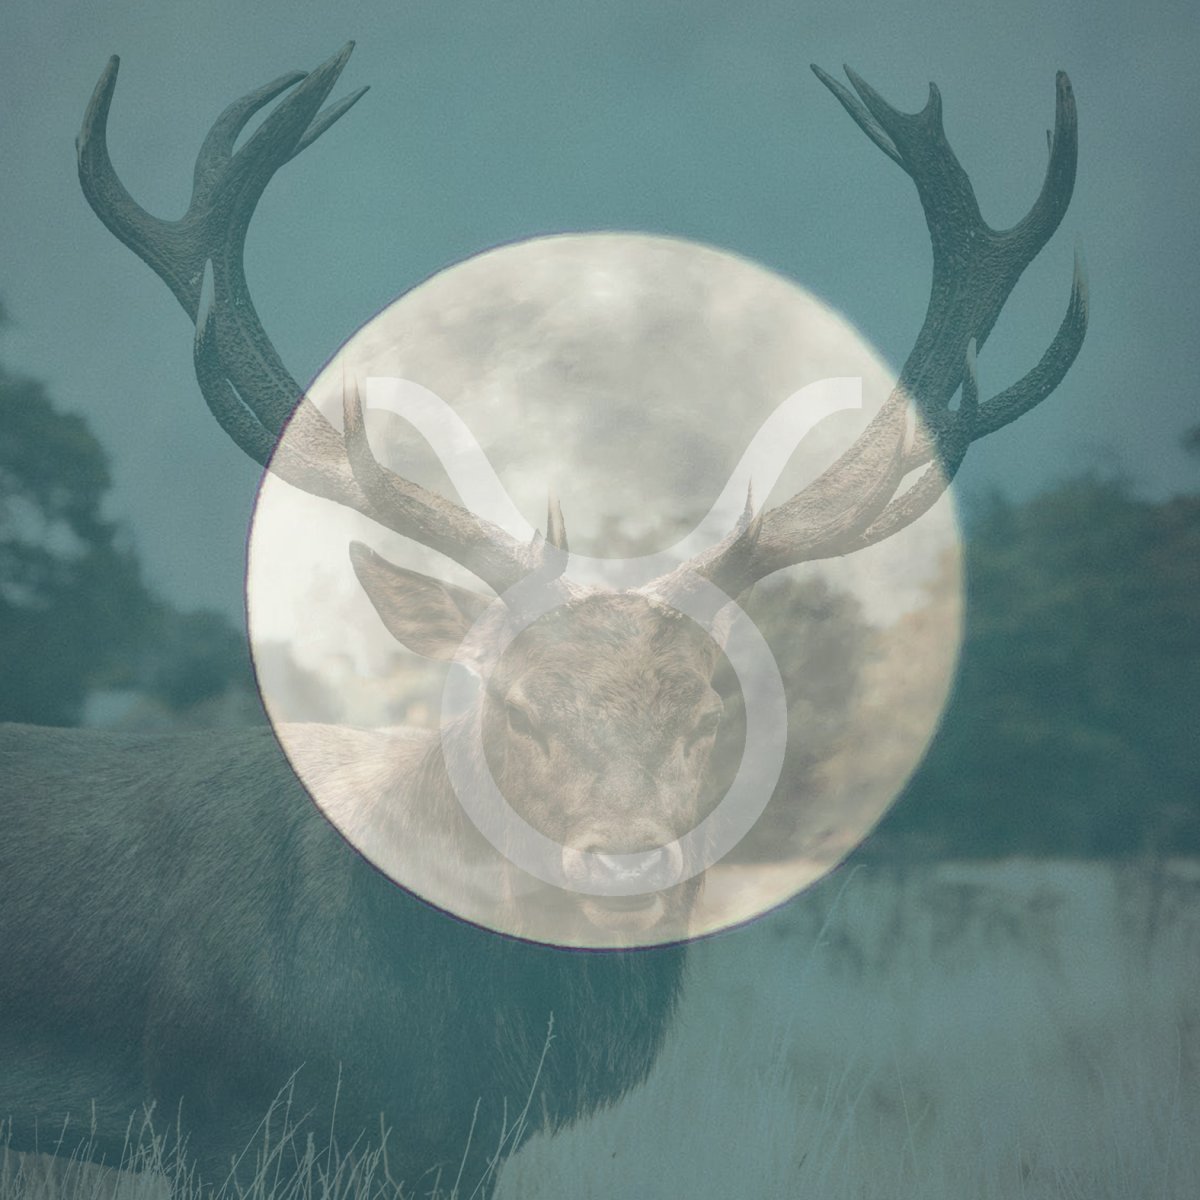 Welcome to the full moon in Taurus 